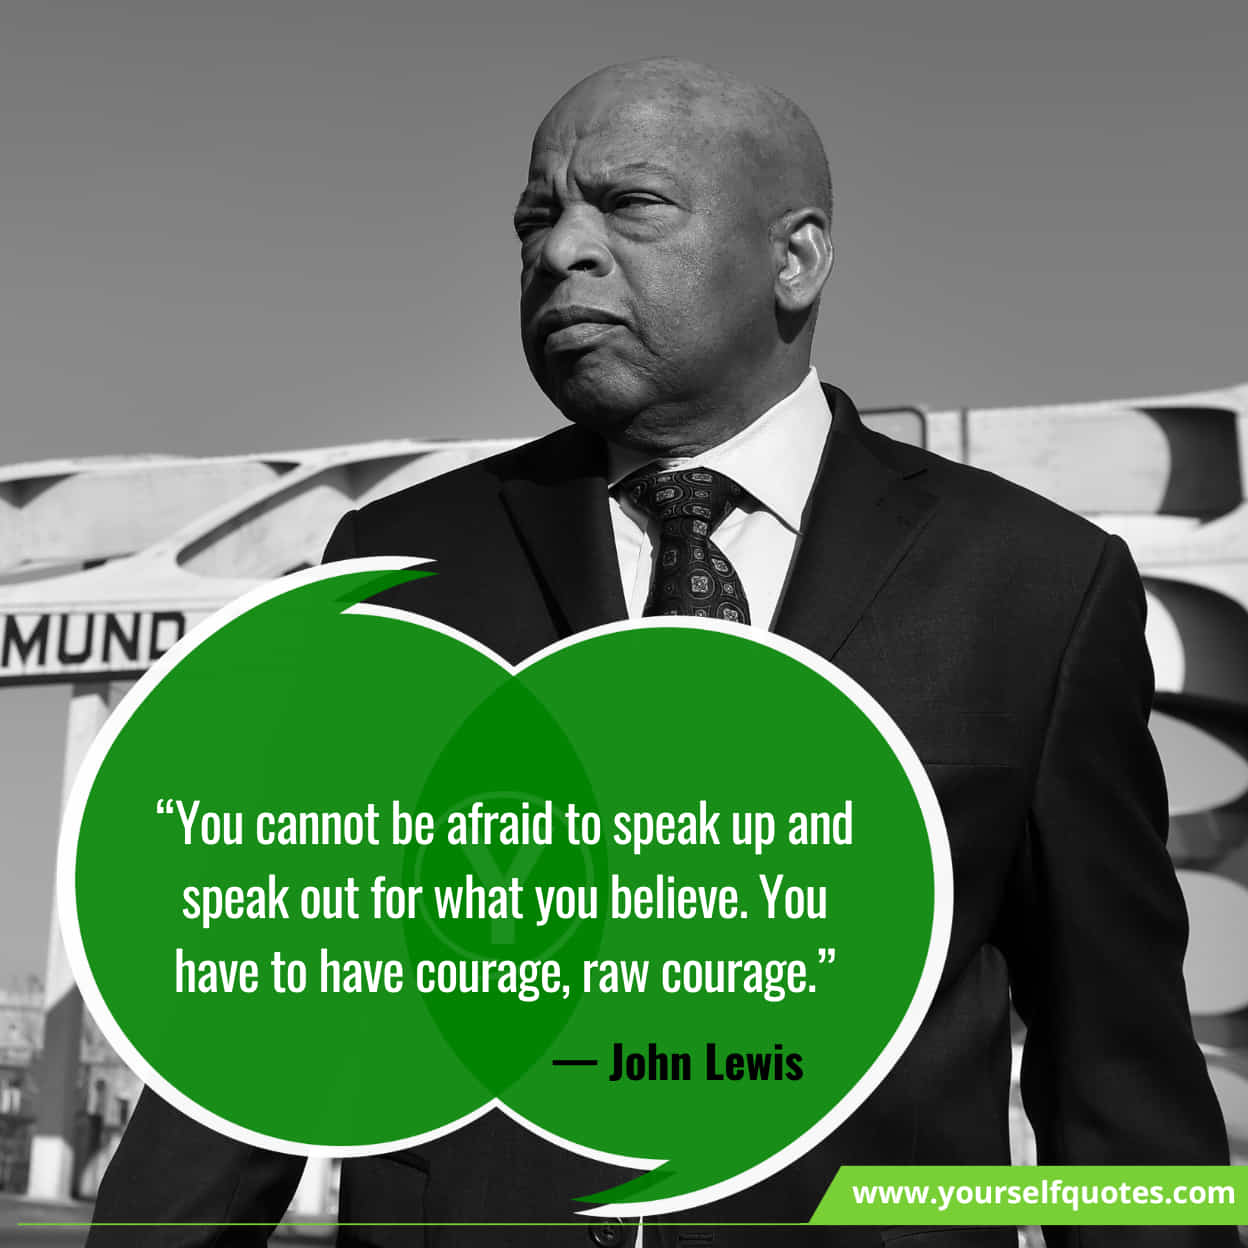 John Lewis Quotes For Work Hard